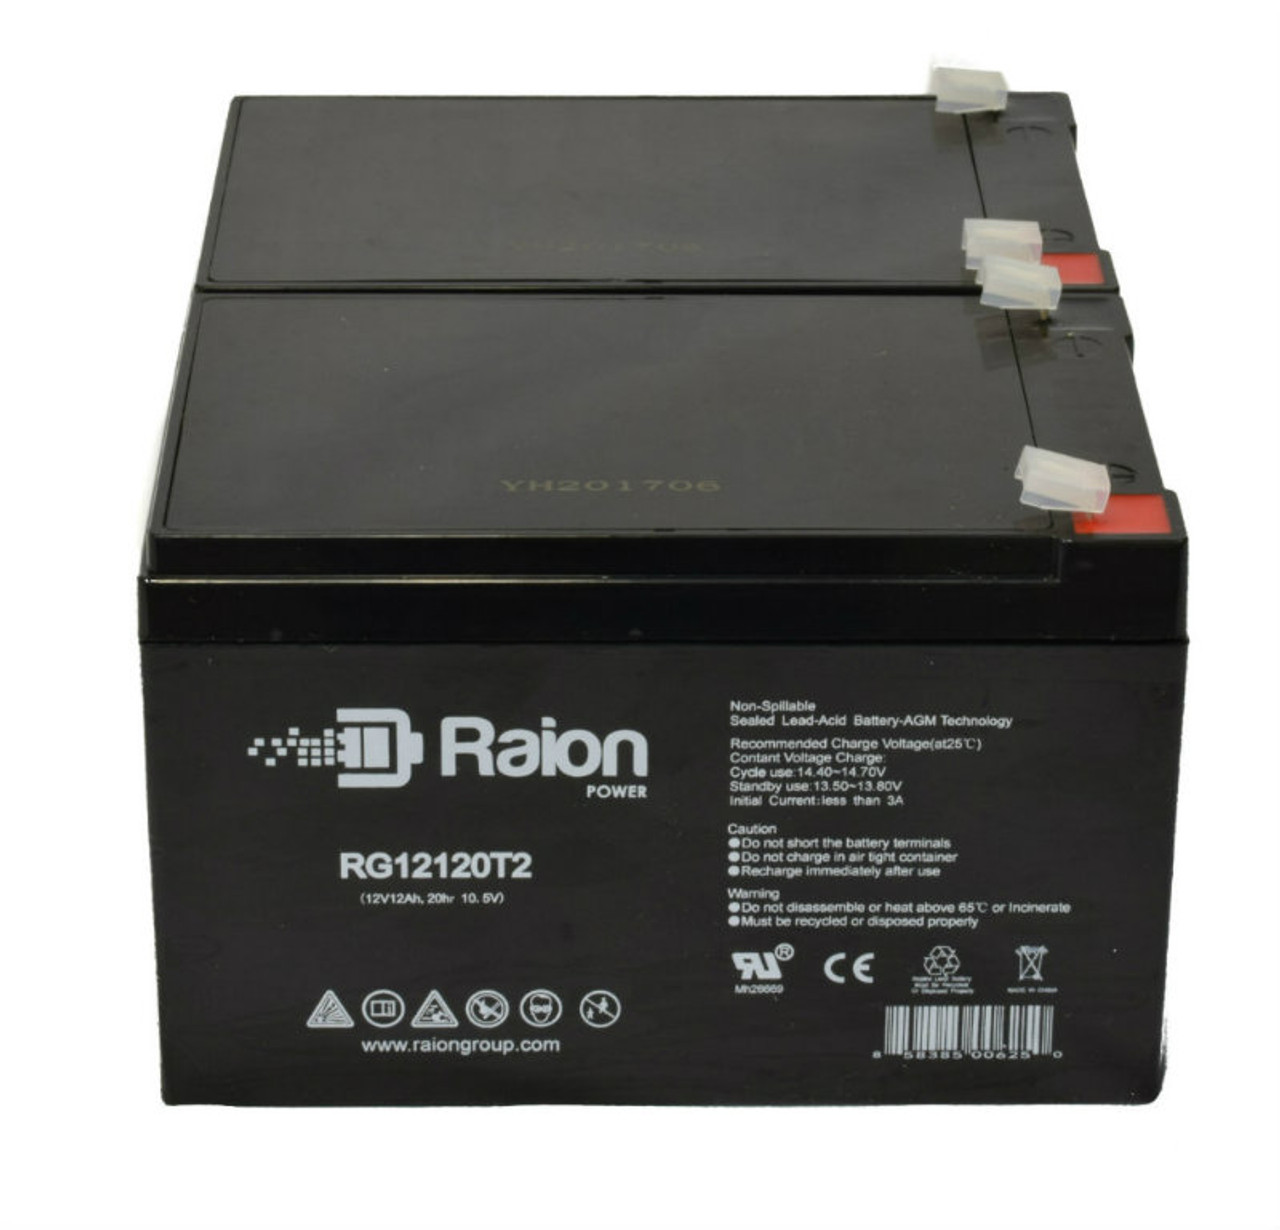 Raion Power 12V 12Ah Non-Spillable Compatible Replacement Battery for Western 6-FM-10 - (2 Pack)